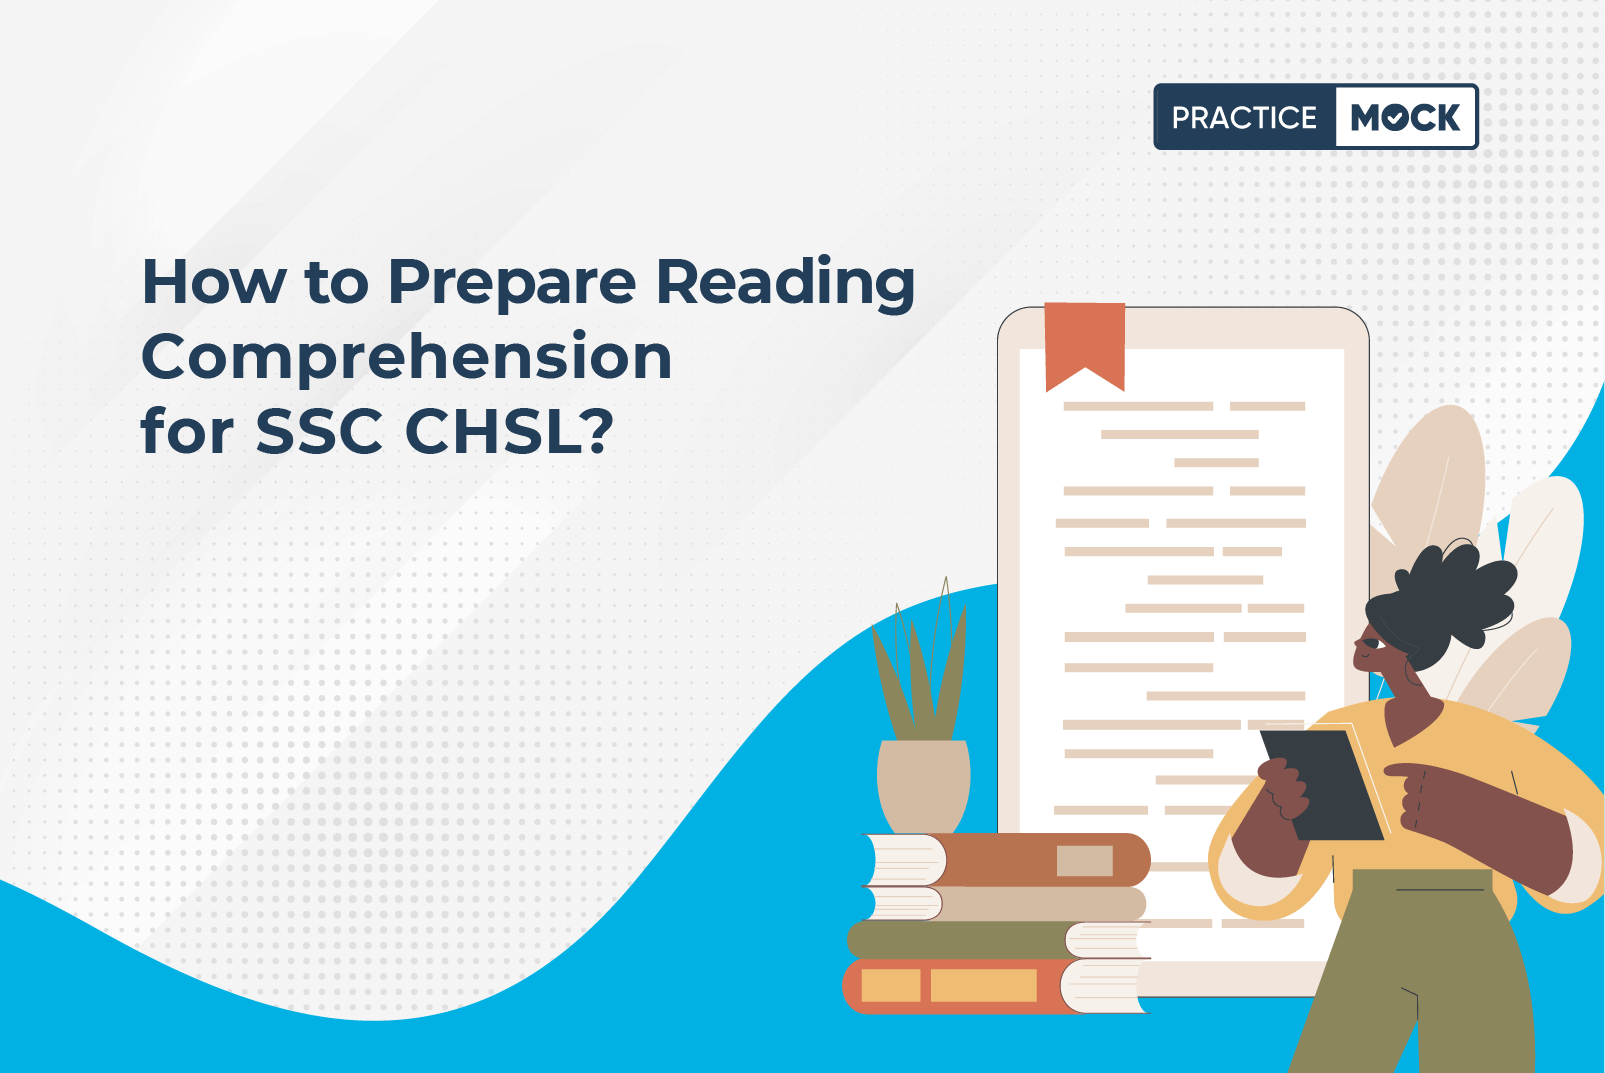 How to Prepare Reading Comprehension for SSC CHSL? PracticeMock